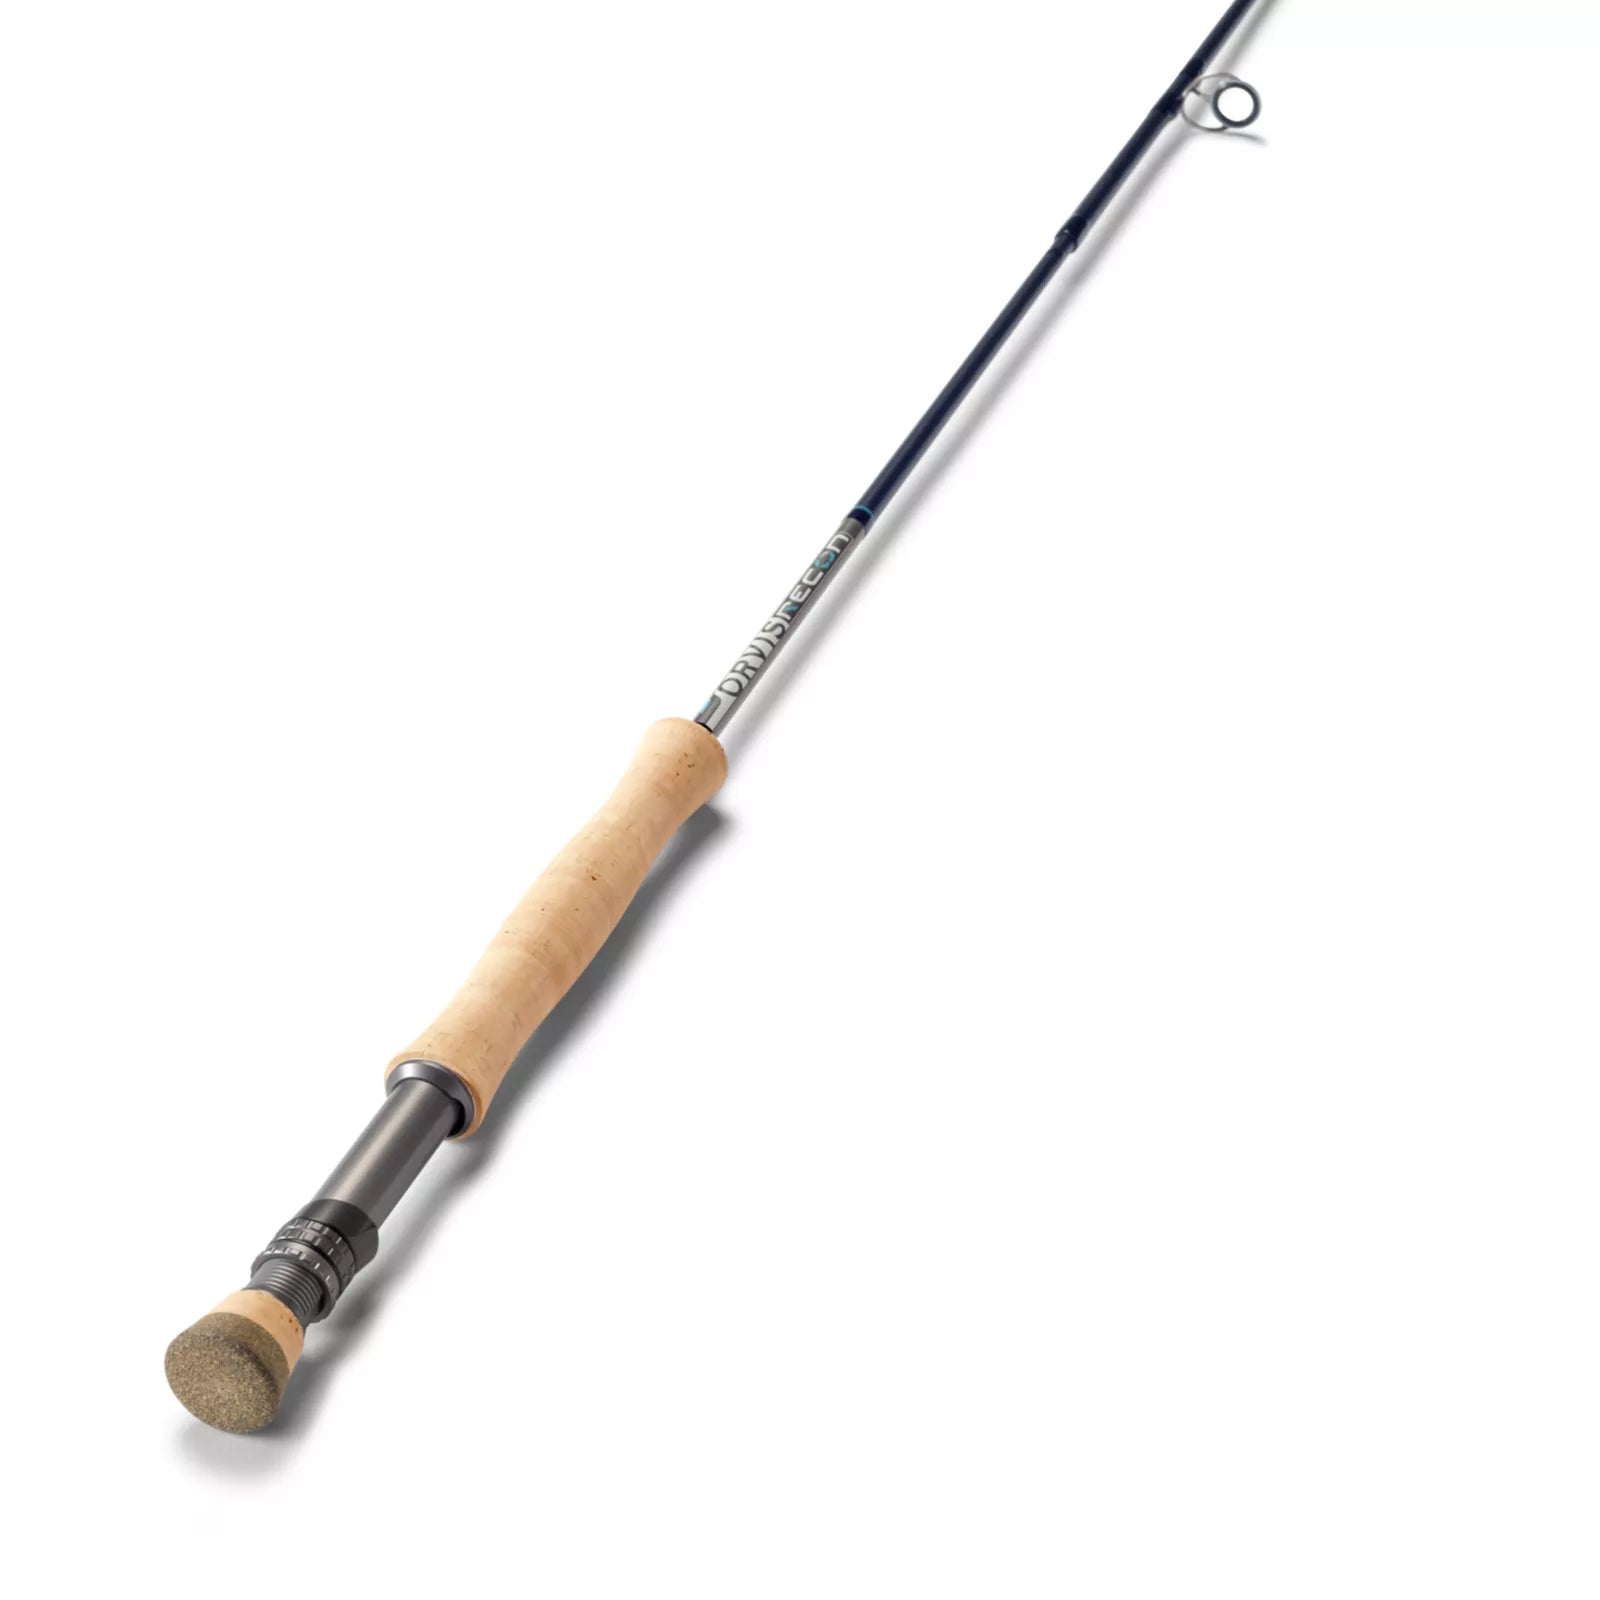 Orvis Recon 2 Freshwater Fly Rod Review - Trident Fly Fishing